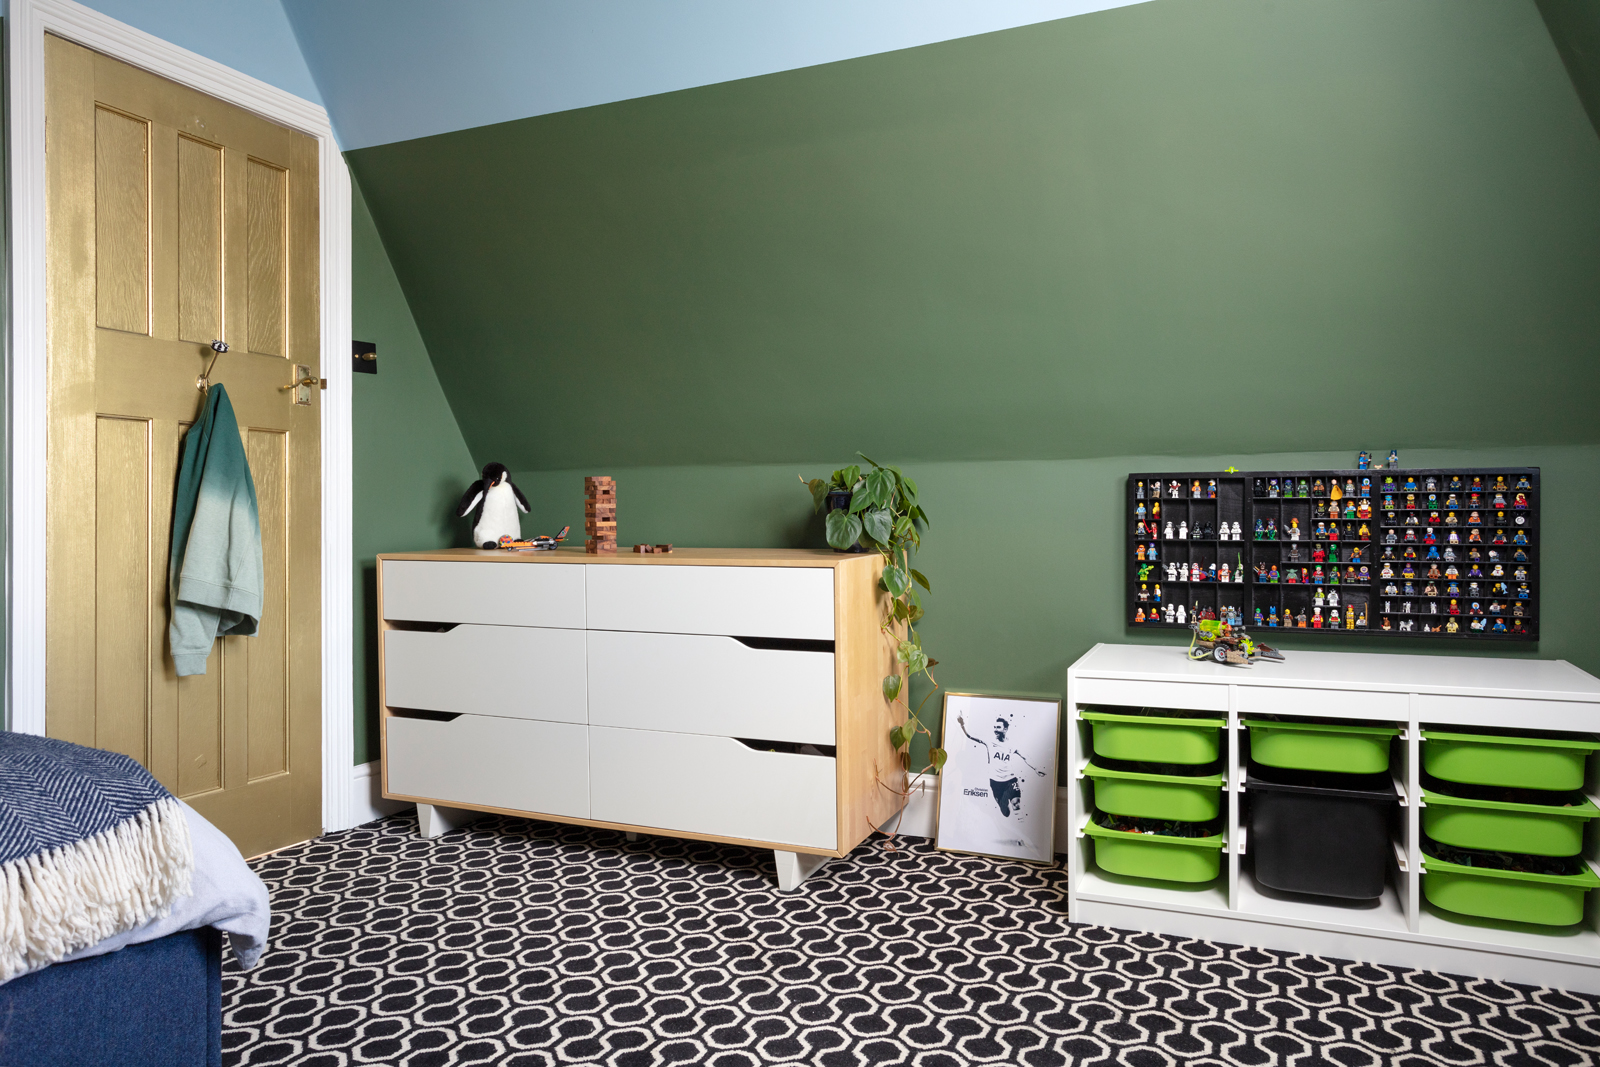 Ikea chest of drawers and Trofast Lego storage looking cool in a child's bedroom